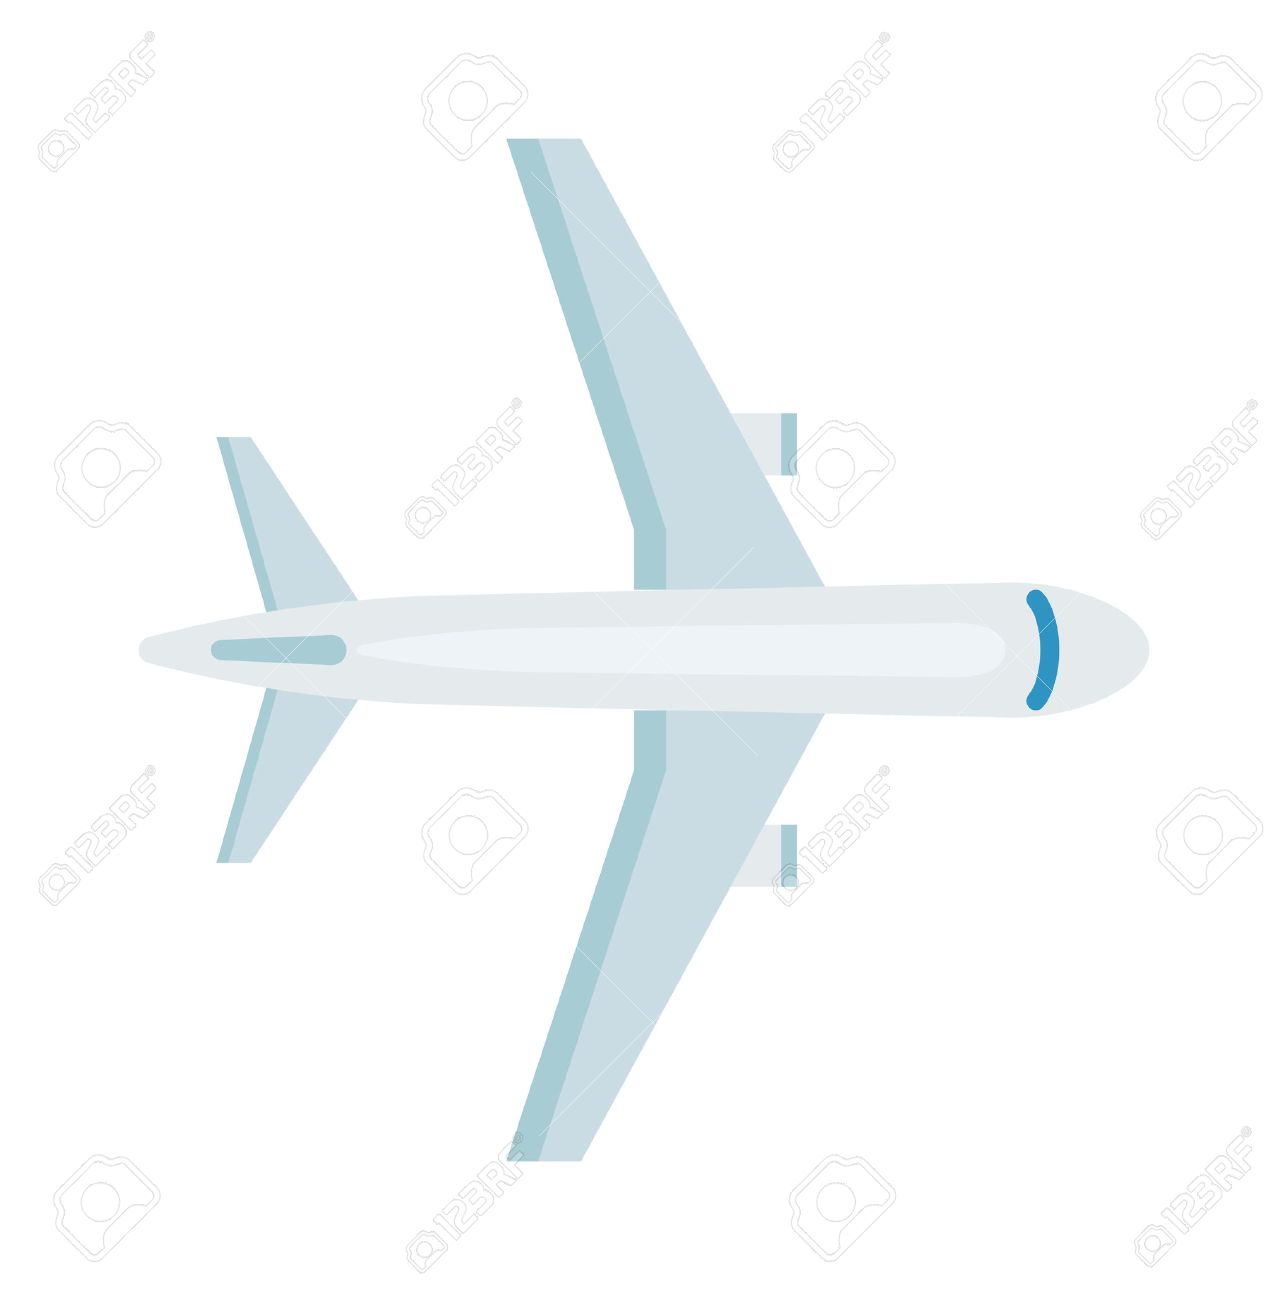 Airplane Top View Clipart.